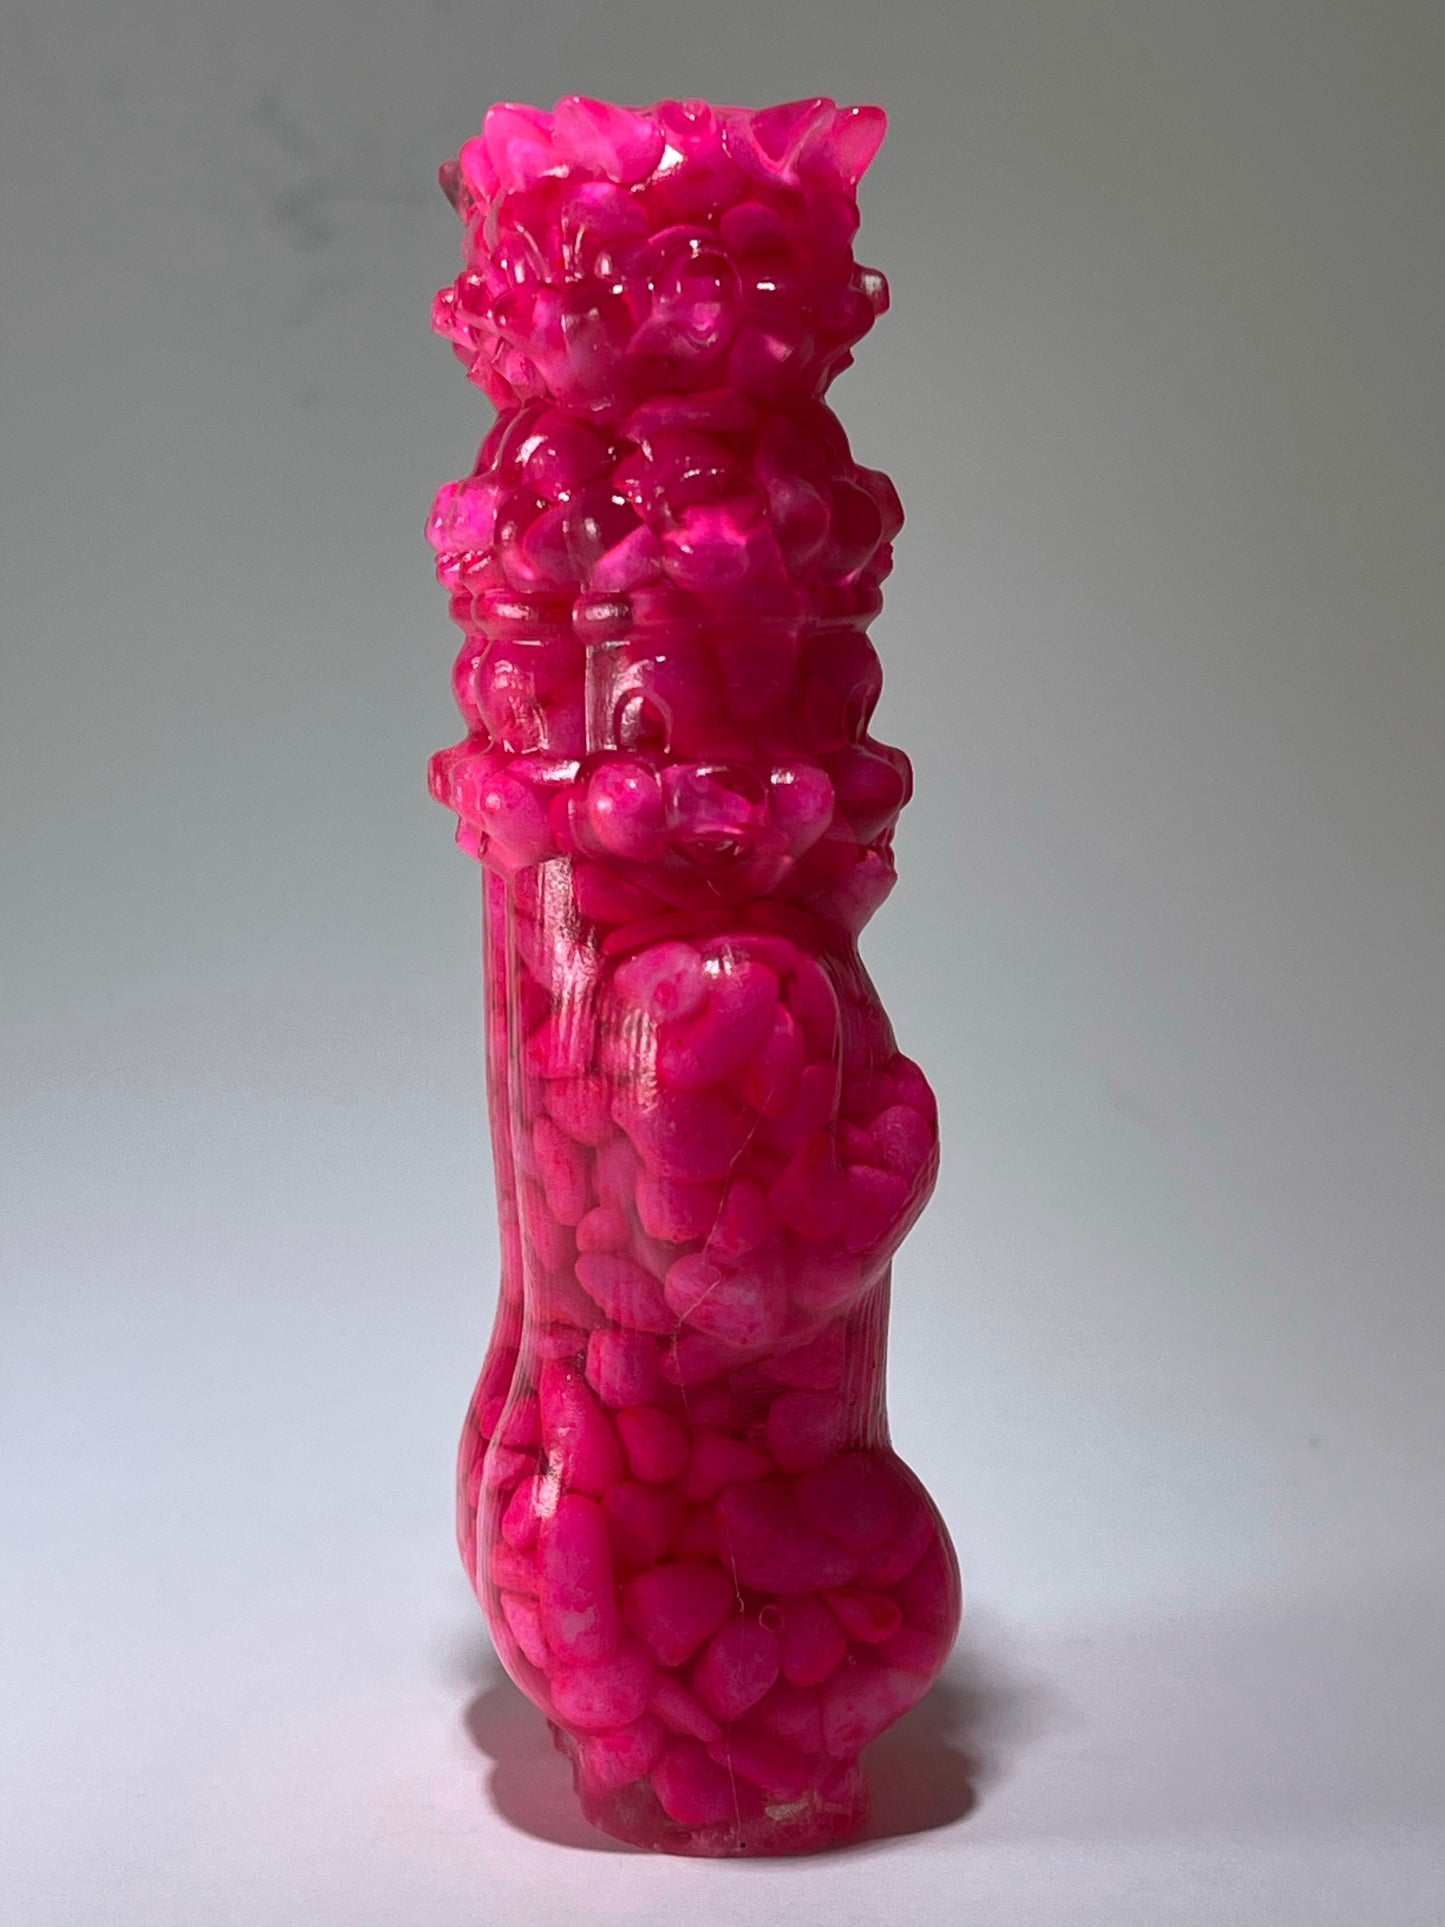 Double Pig Stack Ape: Resin Cast with Pink Neon Stones